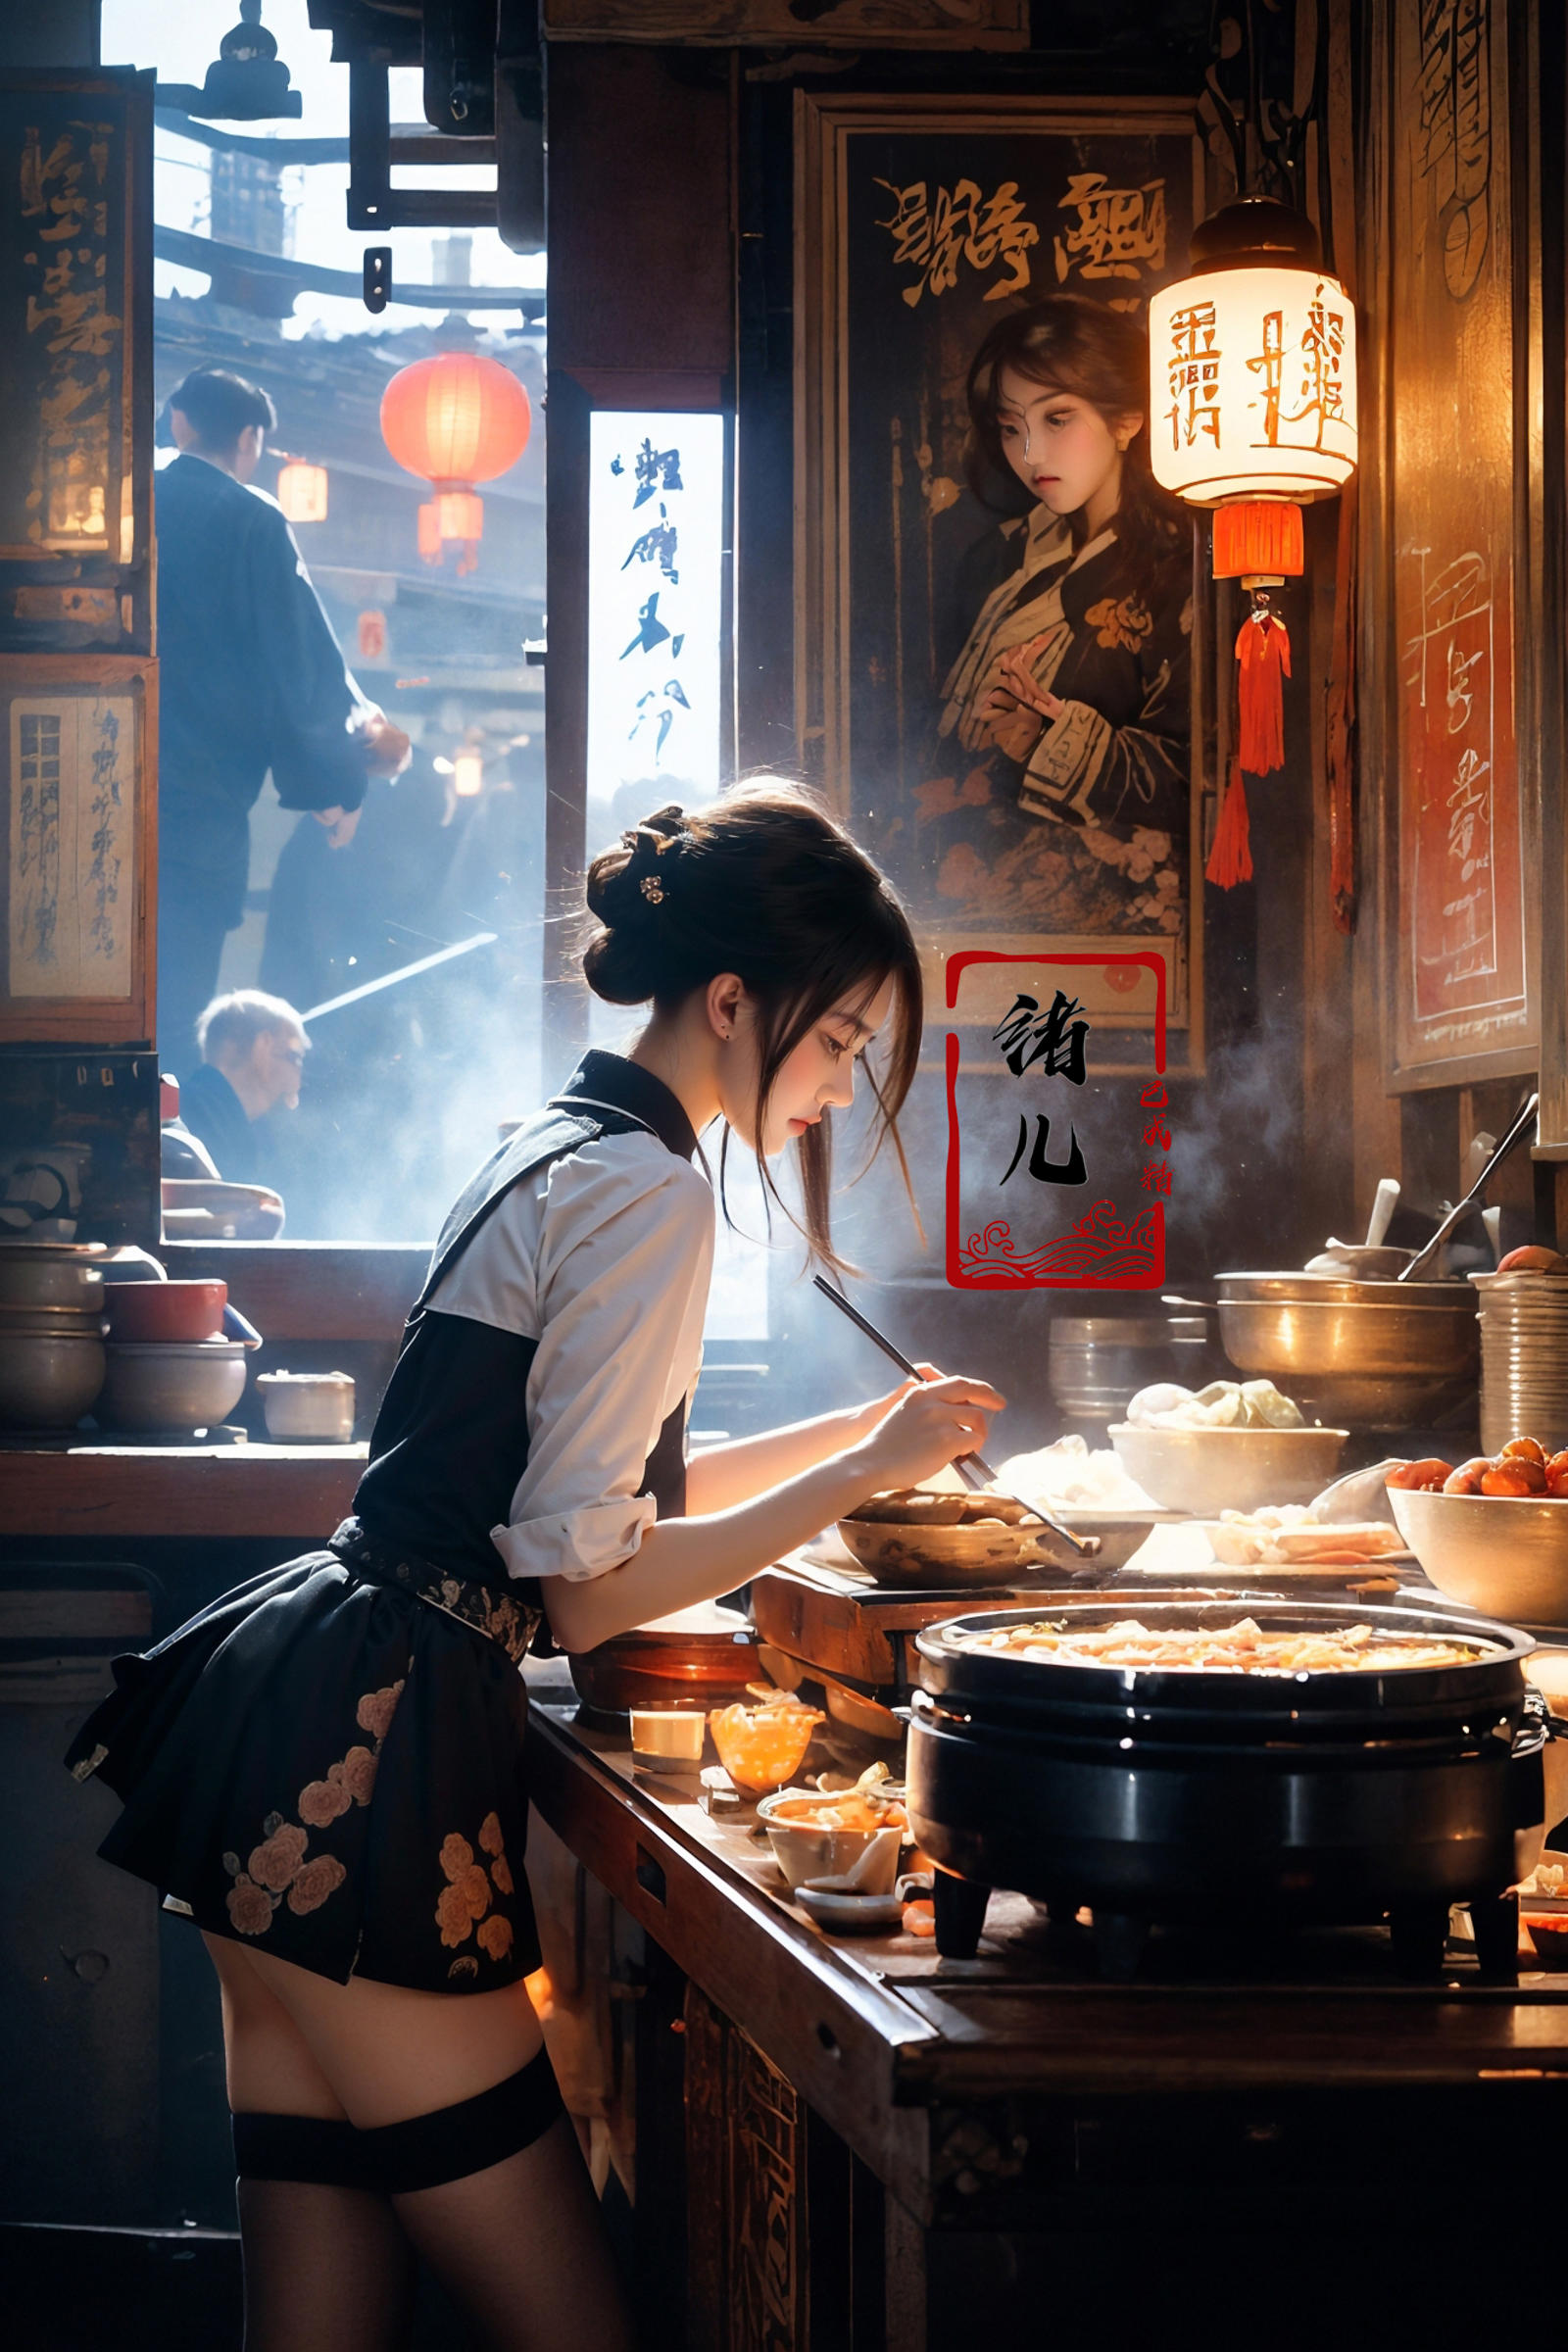 A young woman preparing food in a restaurant.